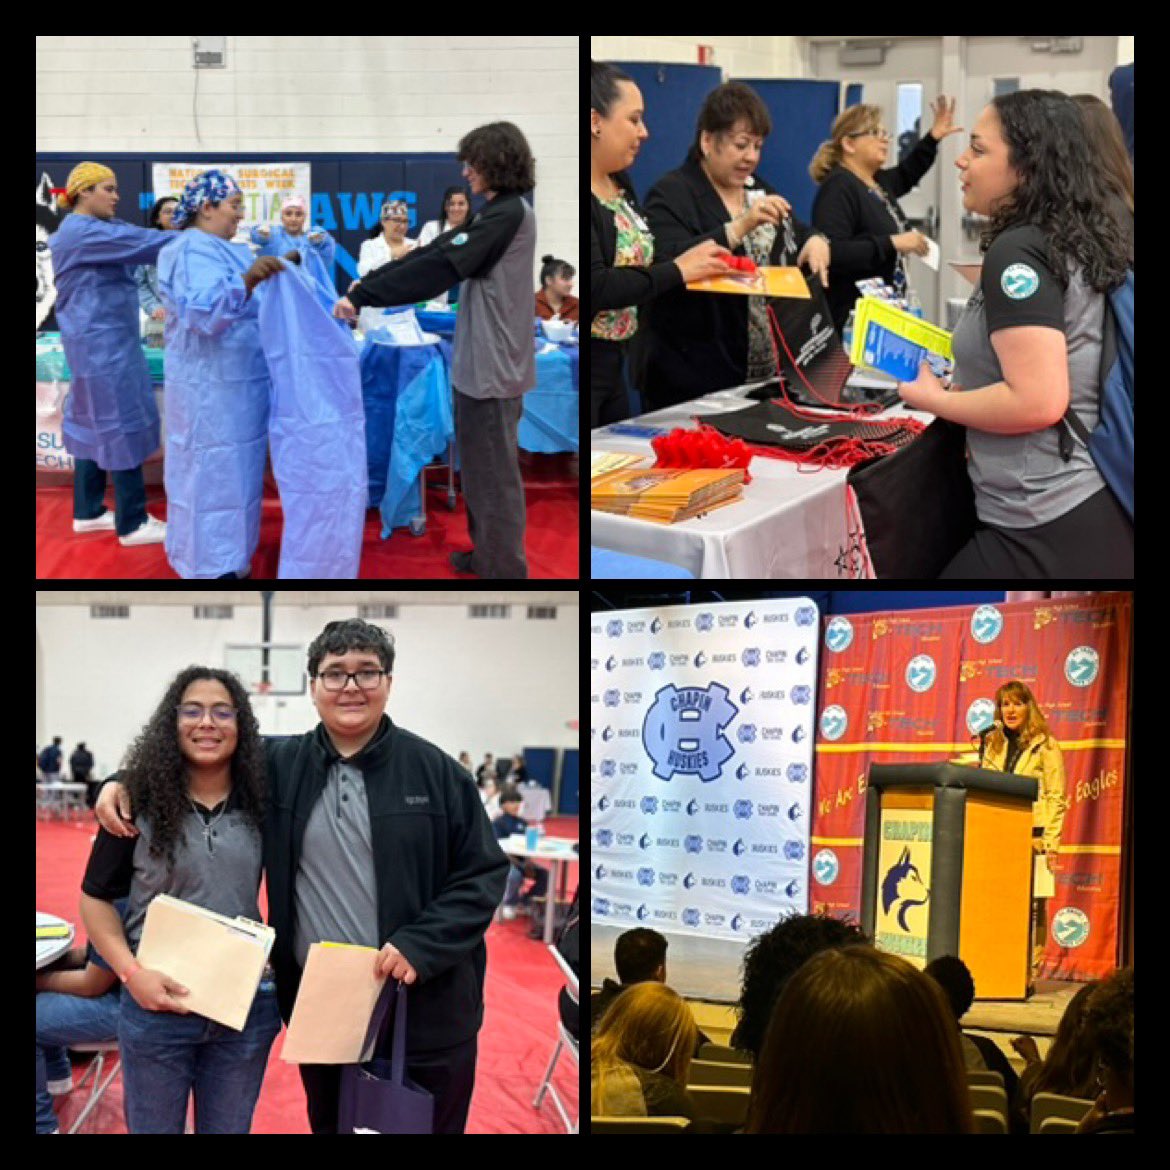 Andress, Chapin & Irvin: Northeast P-Tech Schools are IN THE ZONE! Our students are feeling confident and ready after their mock job interviews. 
Big thanks to all community partners for their valuable time and feedback during our College & Career Fair. #CareerPrep #PTech #Eagles